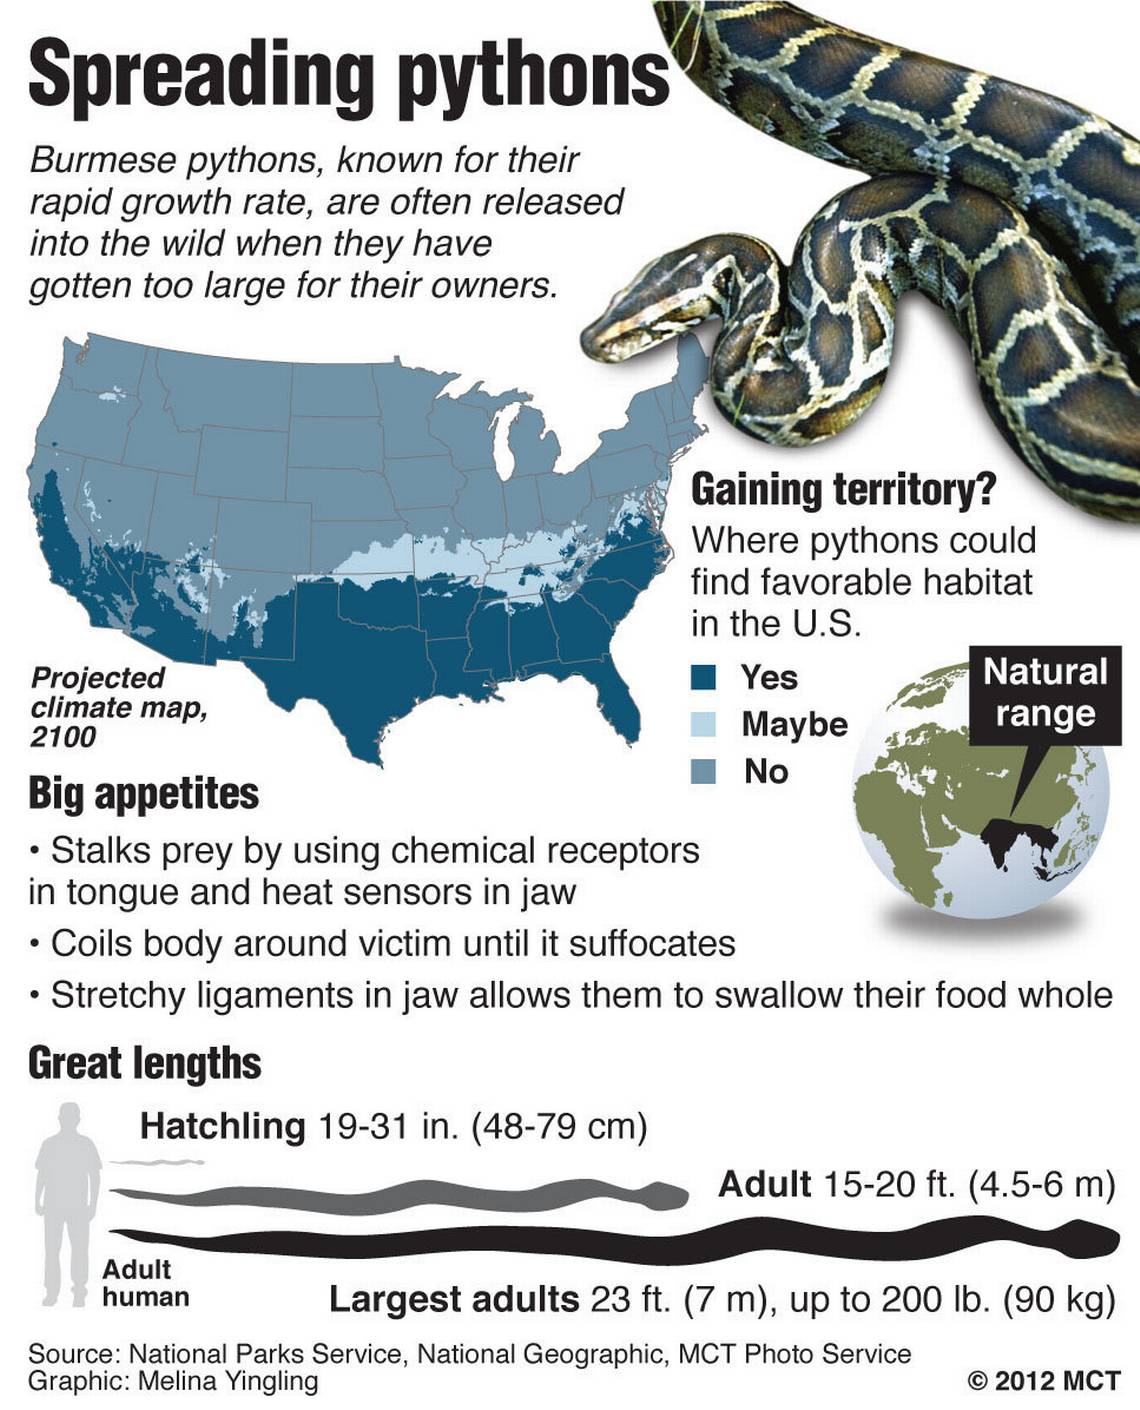 What States Can You Own a Burmese Python?